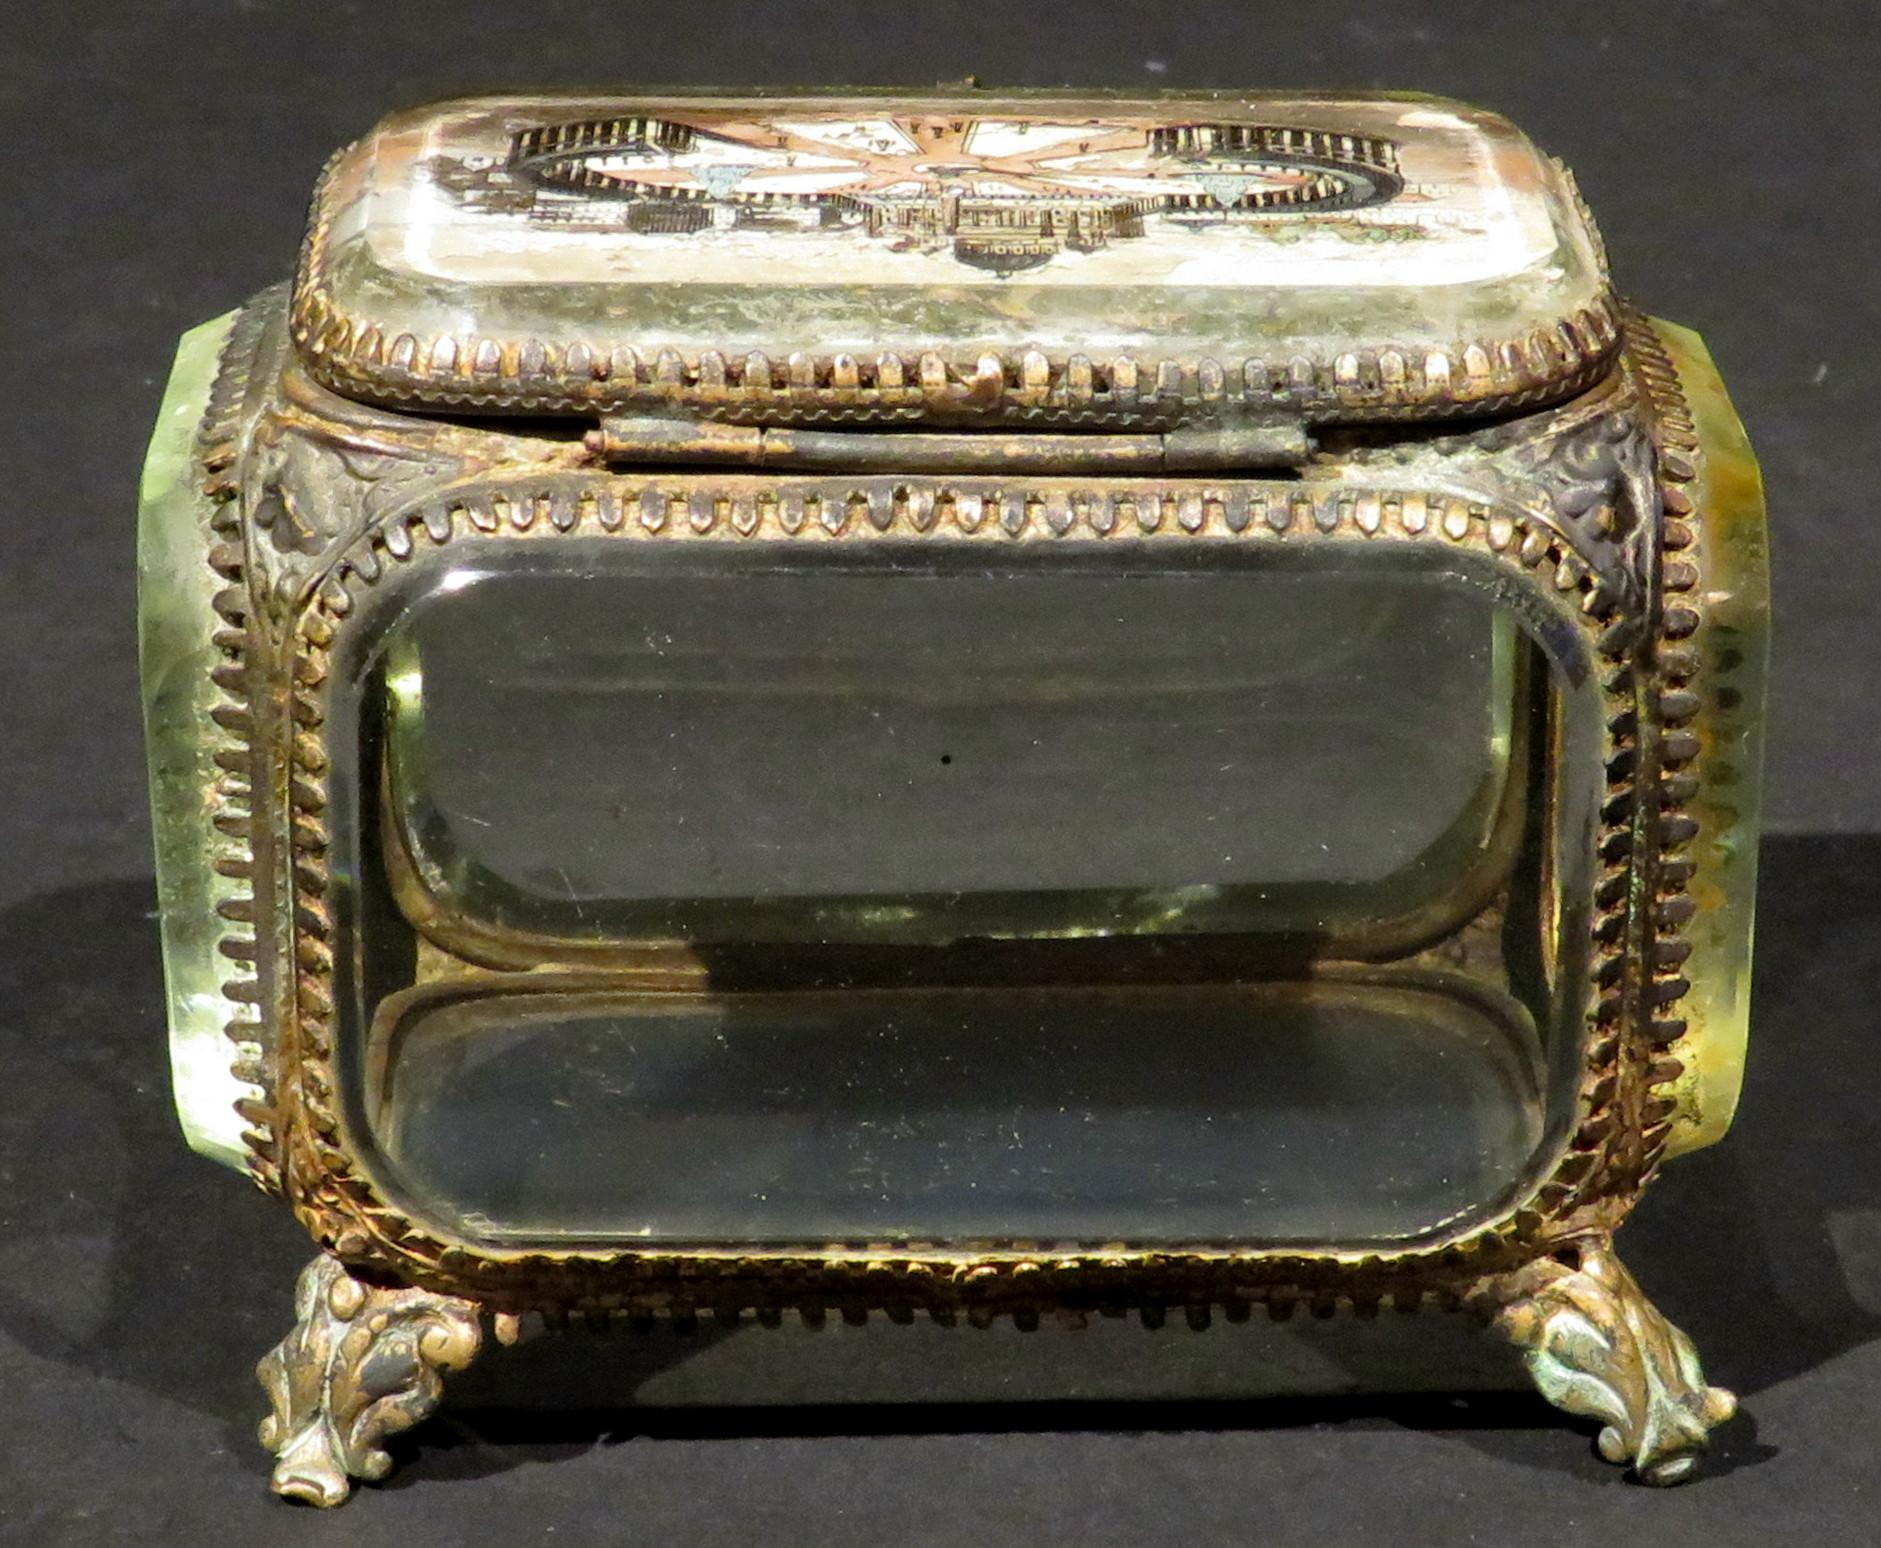 A diminutive Grand Tour style glass trinket box constructed of bevelled glass panels set within an ormolu case on all sides, raised overall upon foliate shaped feet. The hinged top featuring a reverse painted view of Saint Peter's Square in Rome. No